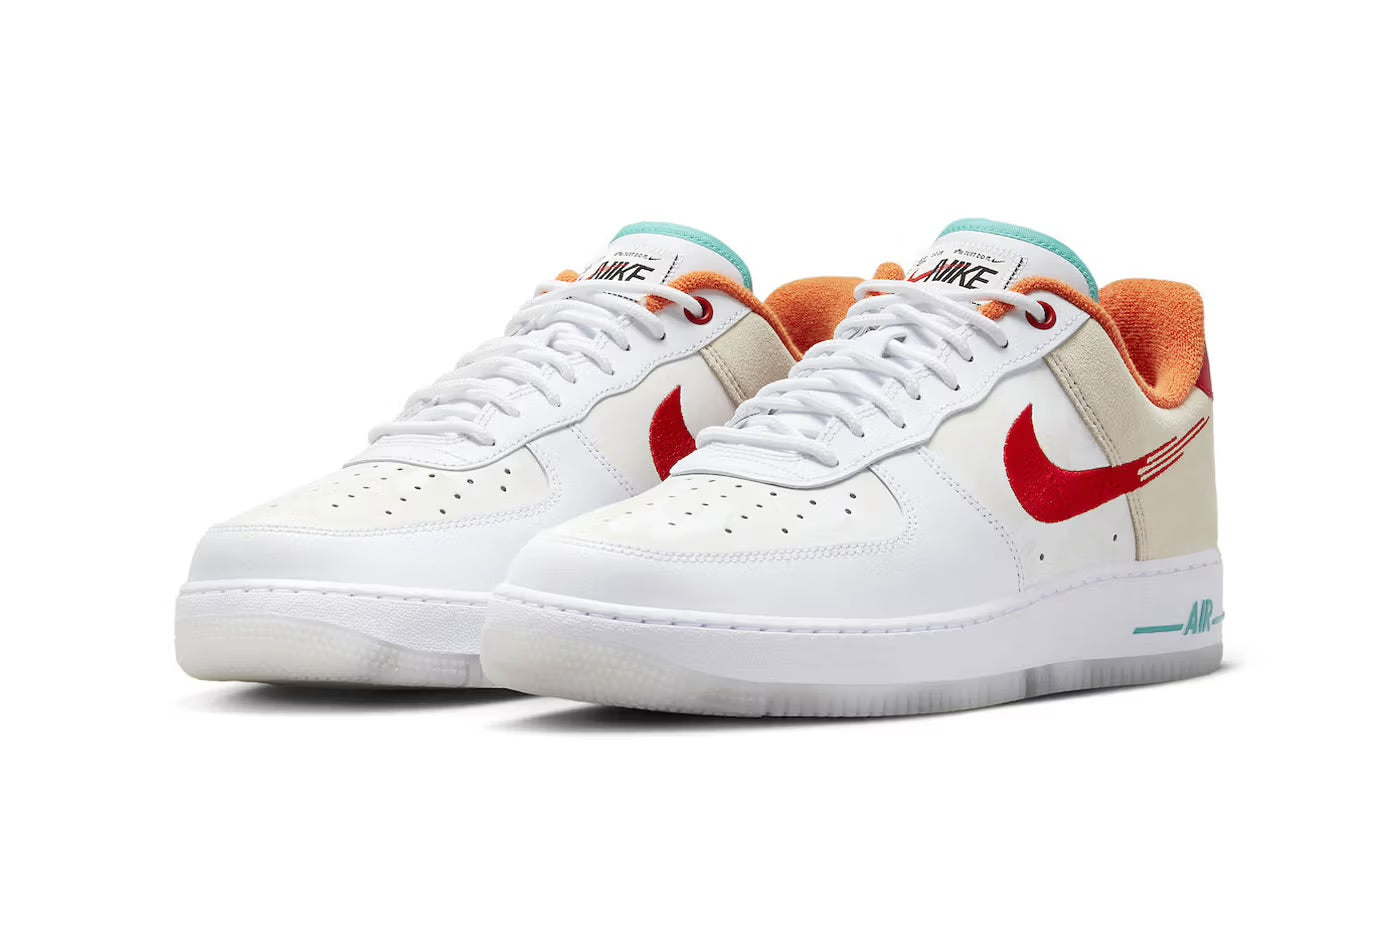 Air Force 1 Low "Just Do It" sneakers